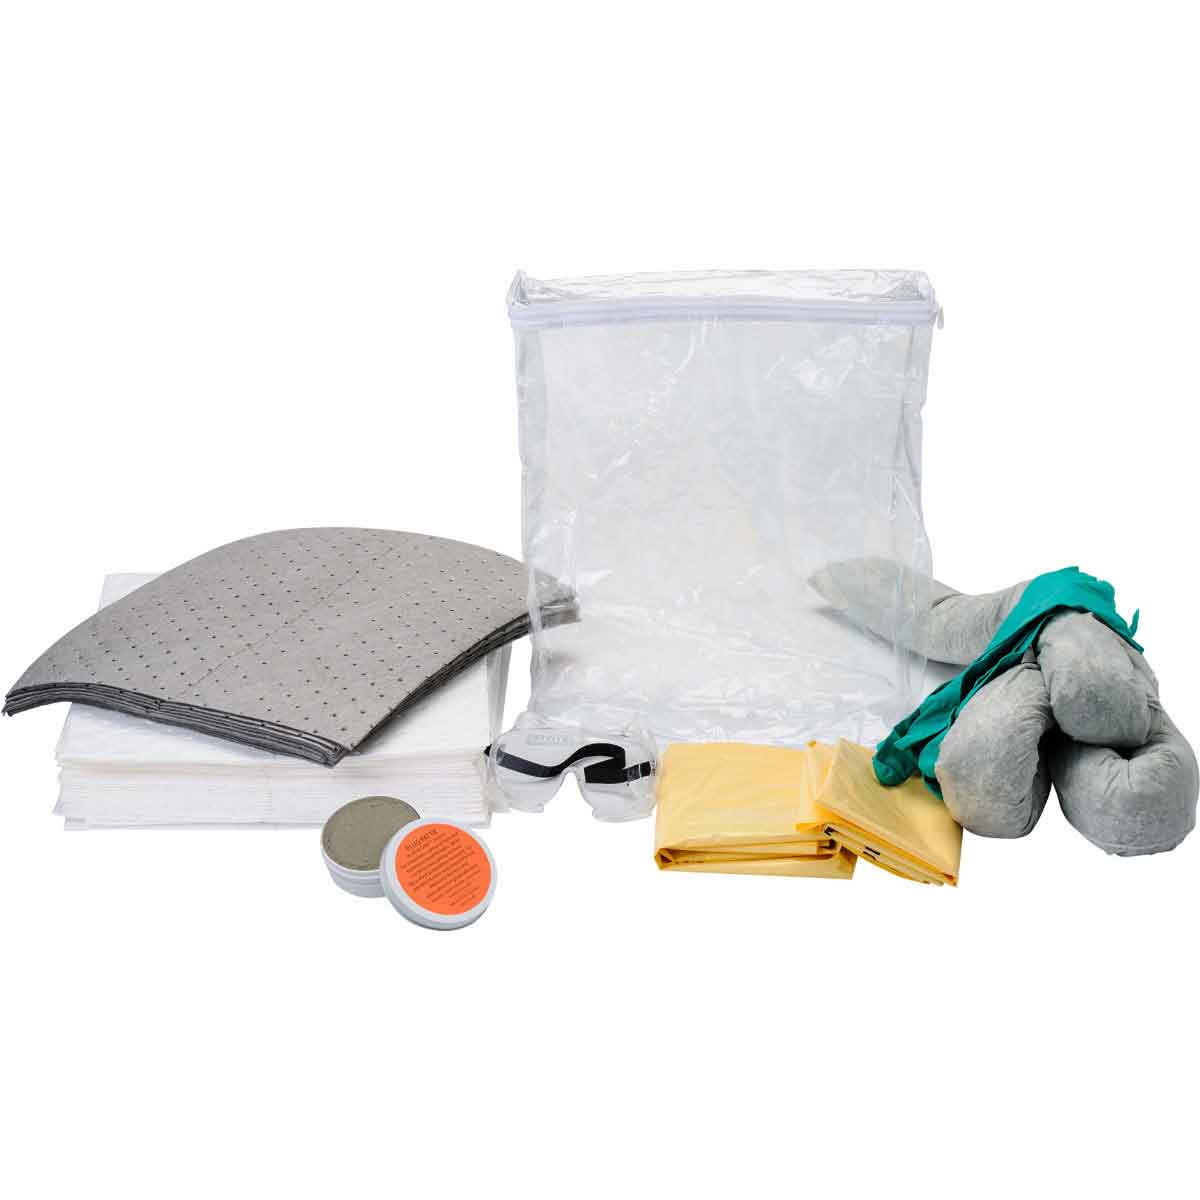 SPC® BSCSK-CB Portable Vehicle Spill Kit, 7.75 gal Bag, Fluids Absorbed: Oil/Universal Content